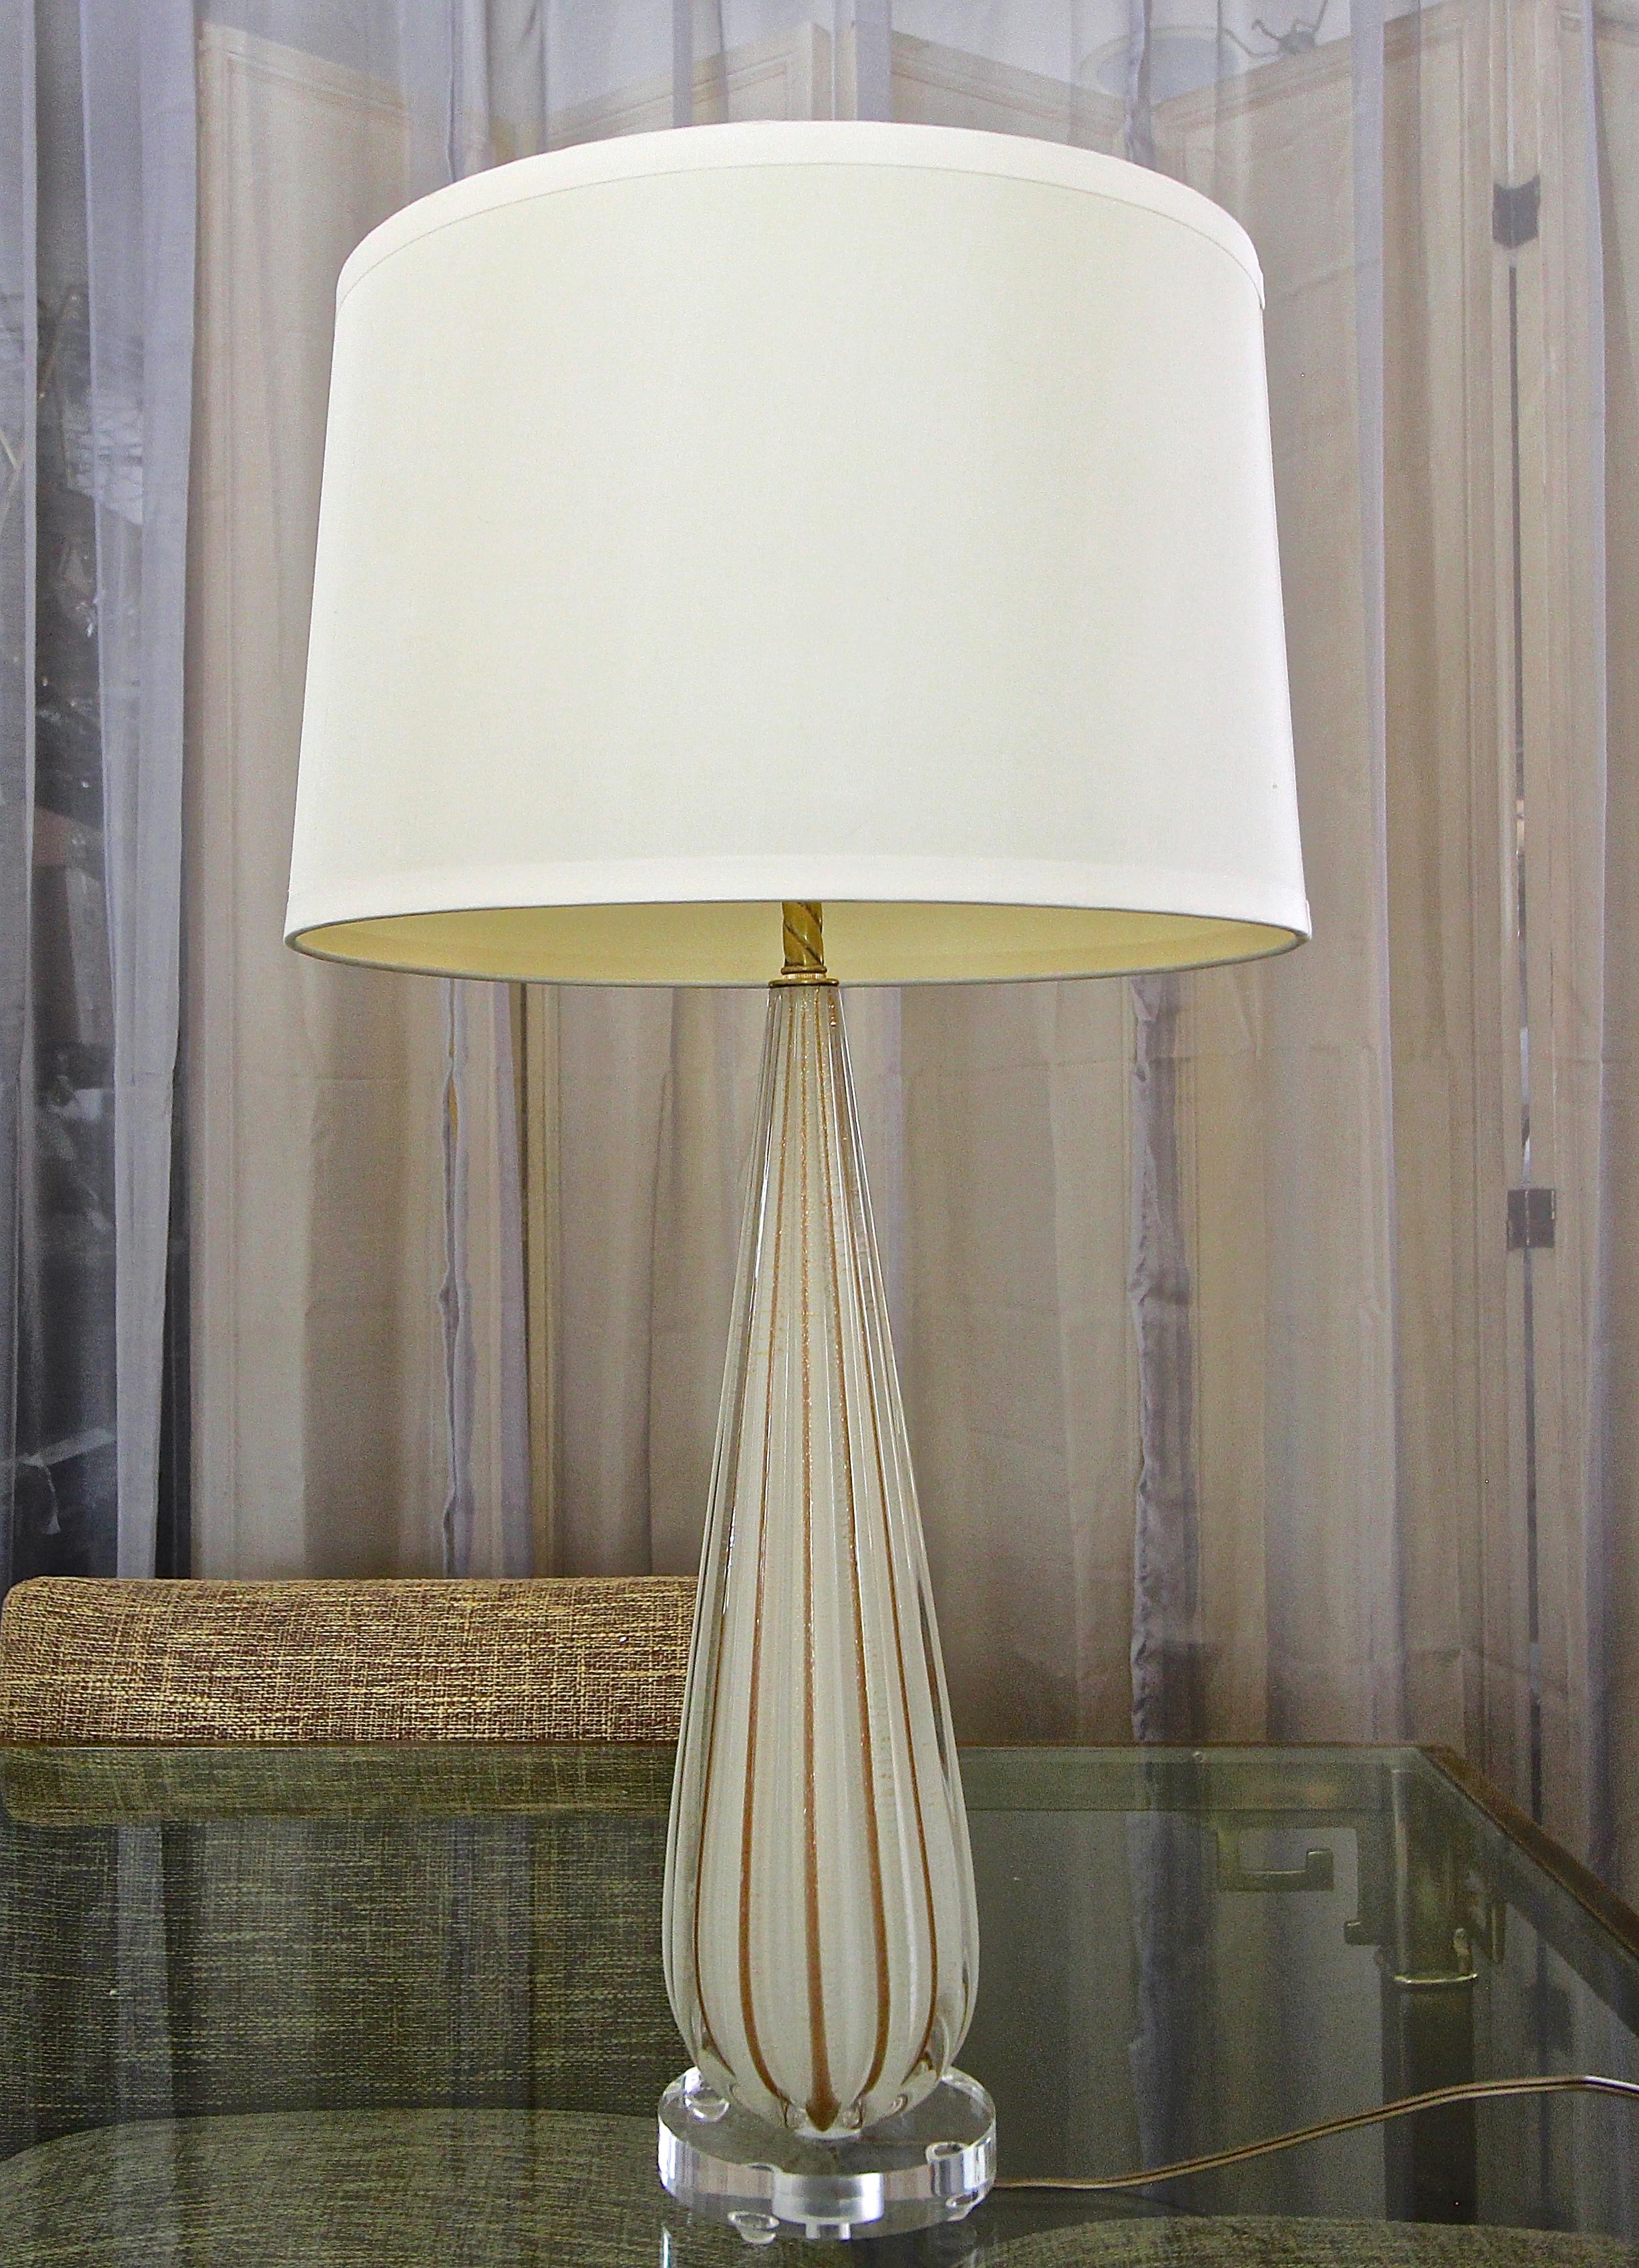 Single Murano Italian hand blown white colored glass table lamp with vertically ribbed aventurine stripes (copper colored gold) on acrylic base. Rewired with new 3-way brass socket and cord. Size of glass portion 18